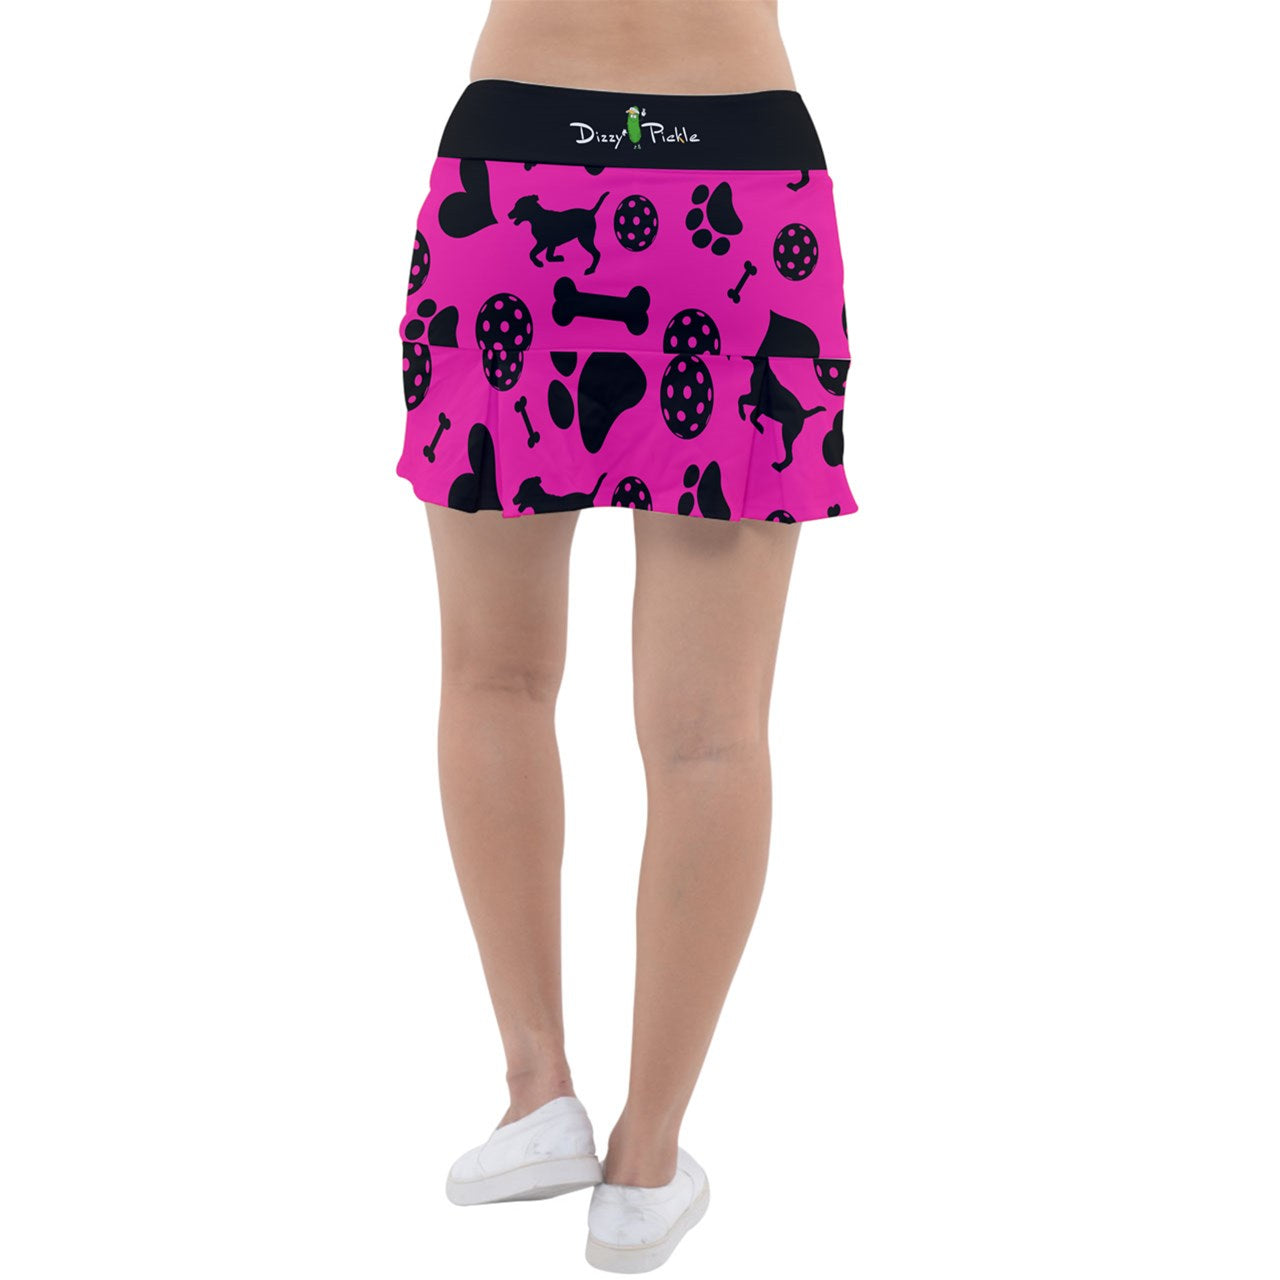 Dizzy Pickle Millie Women's Pickleball Classic Pleated Skort Coordinating Patterned Inner Shorts Pockets Pink